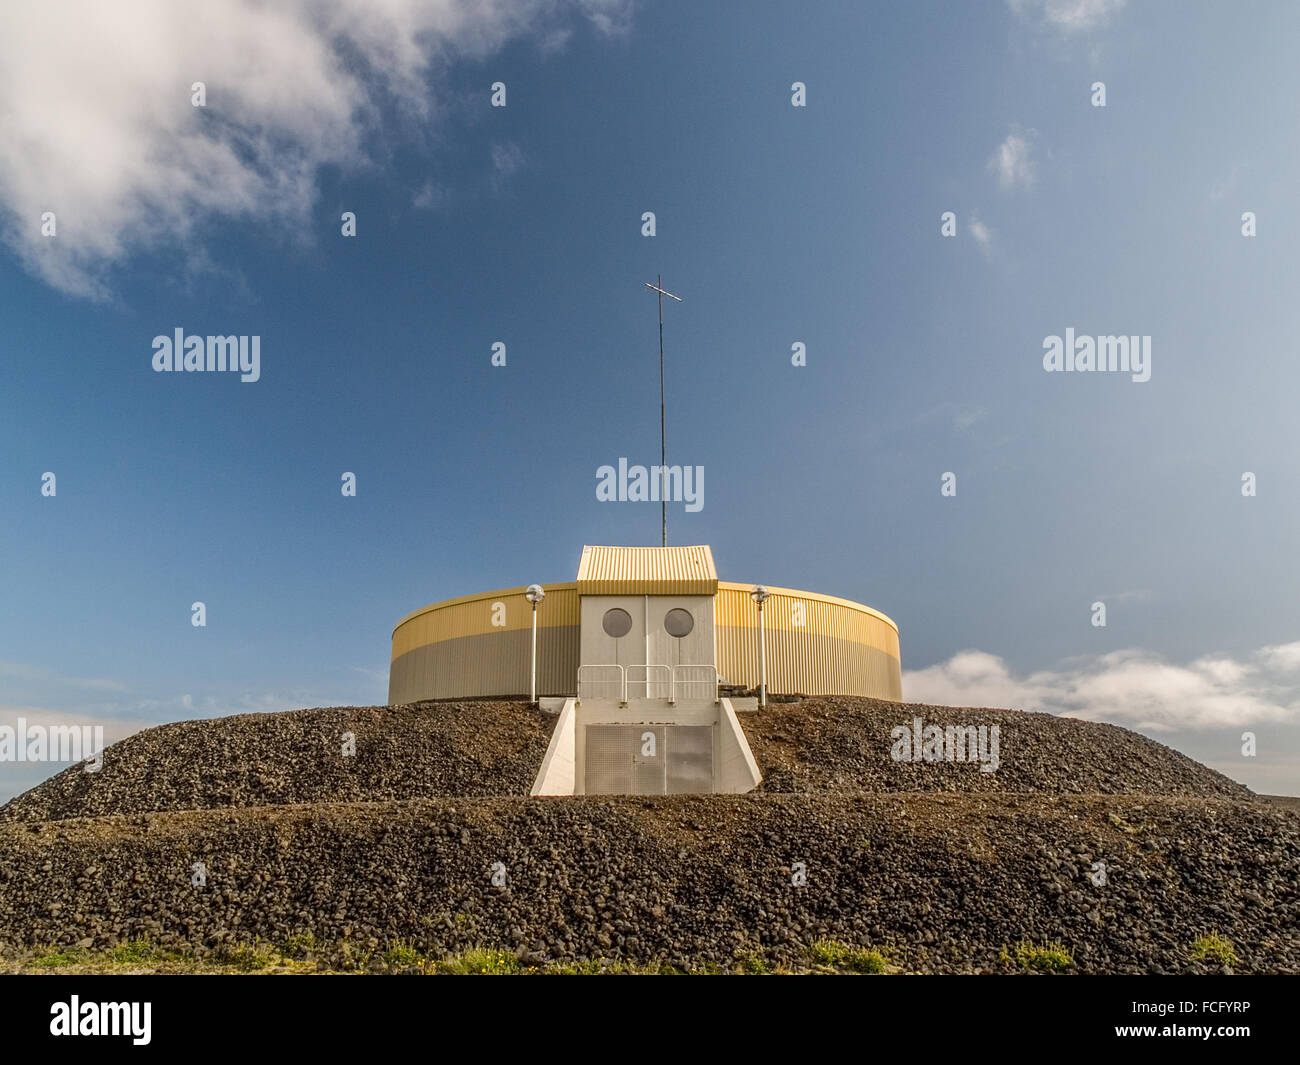 Circular industrial yellow and gray building on top of gravel platform against a blue sky with clouds near Keflavik Iceland. Stock Photo